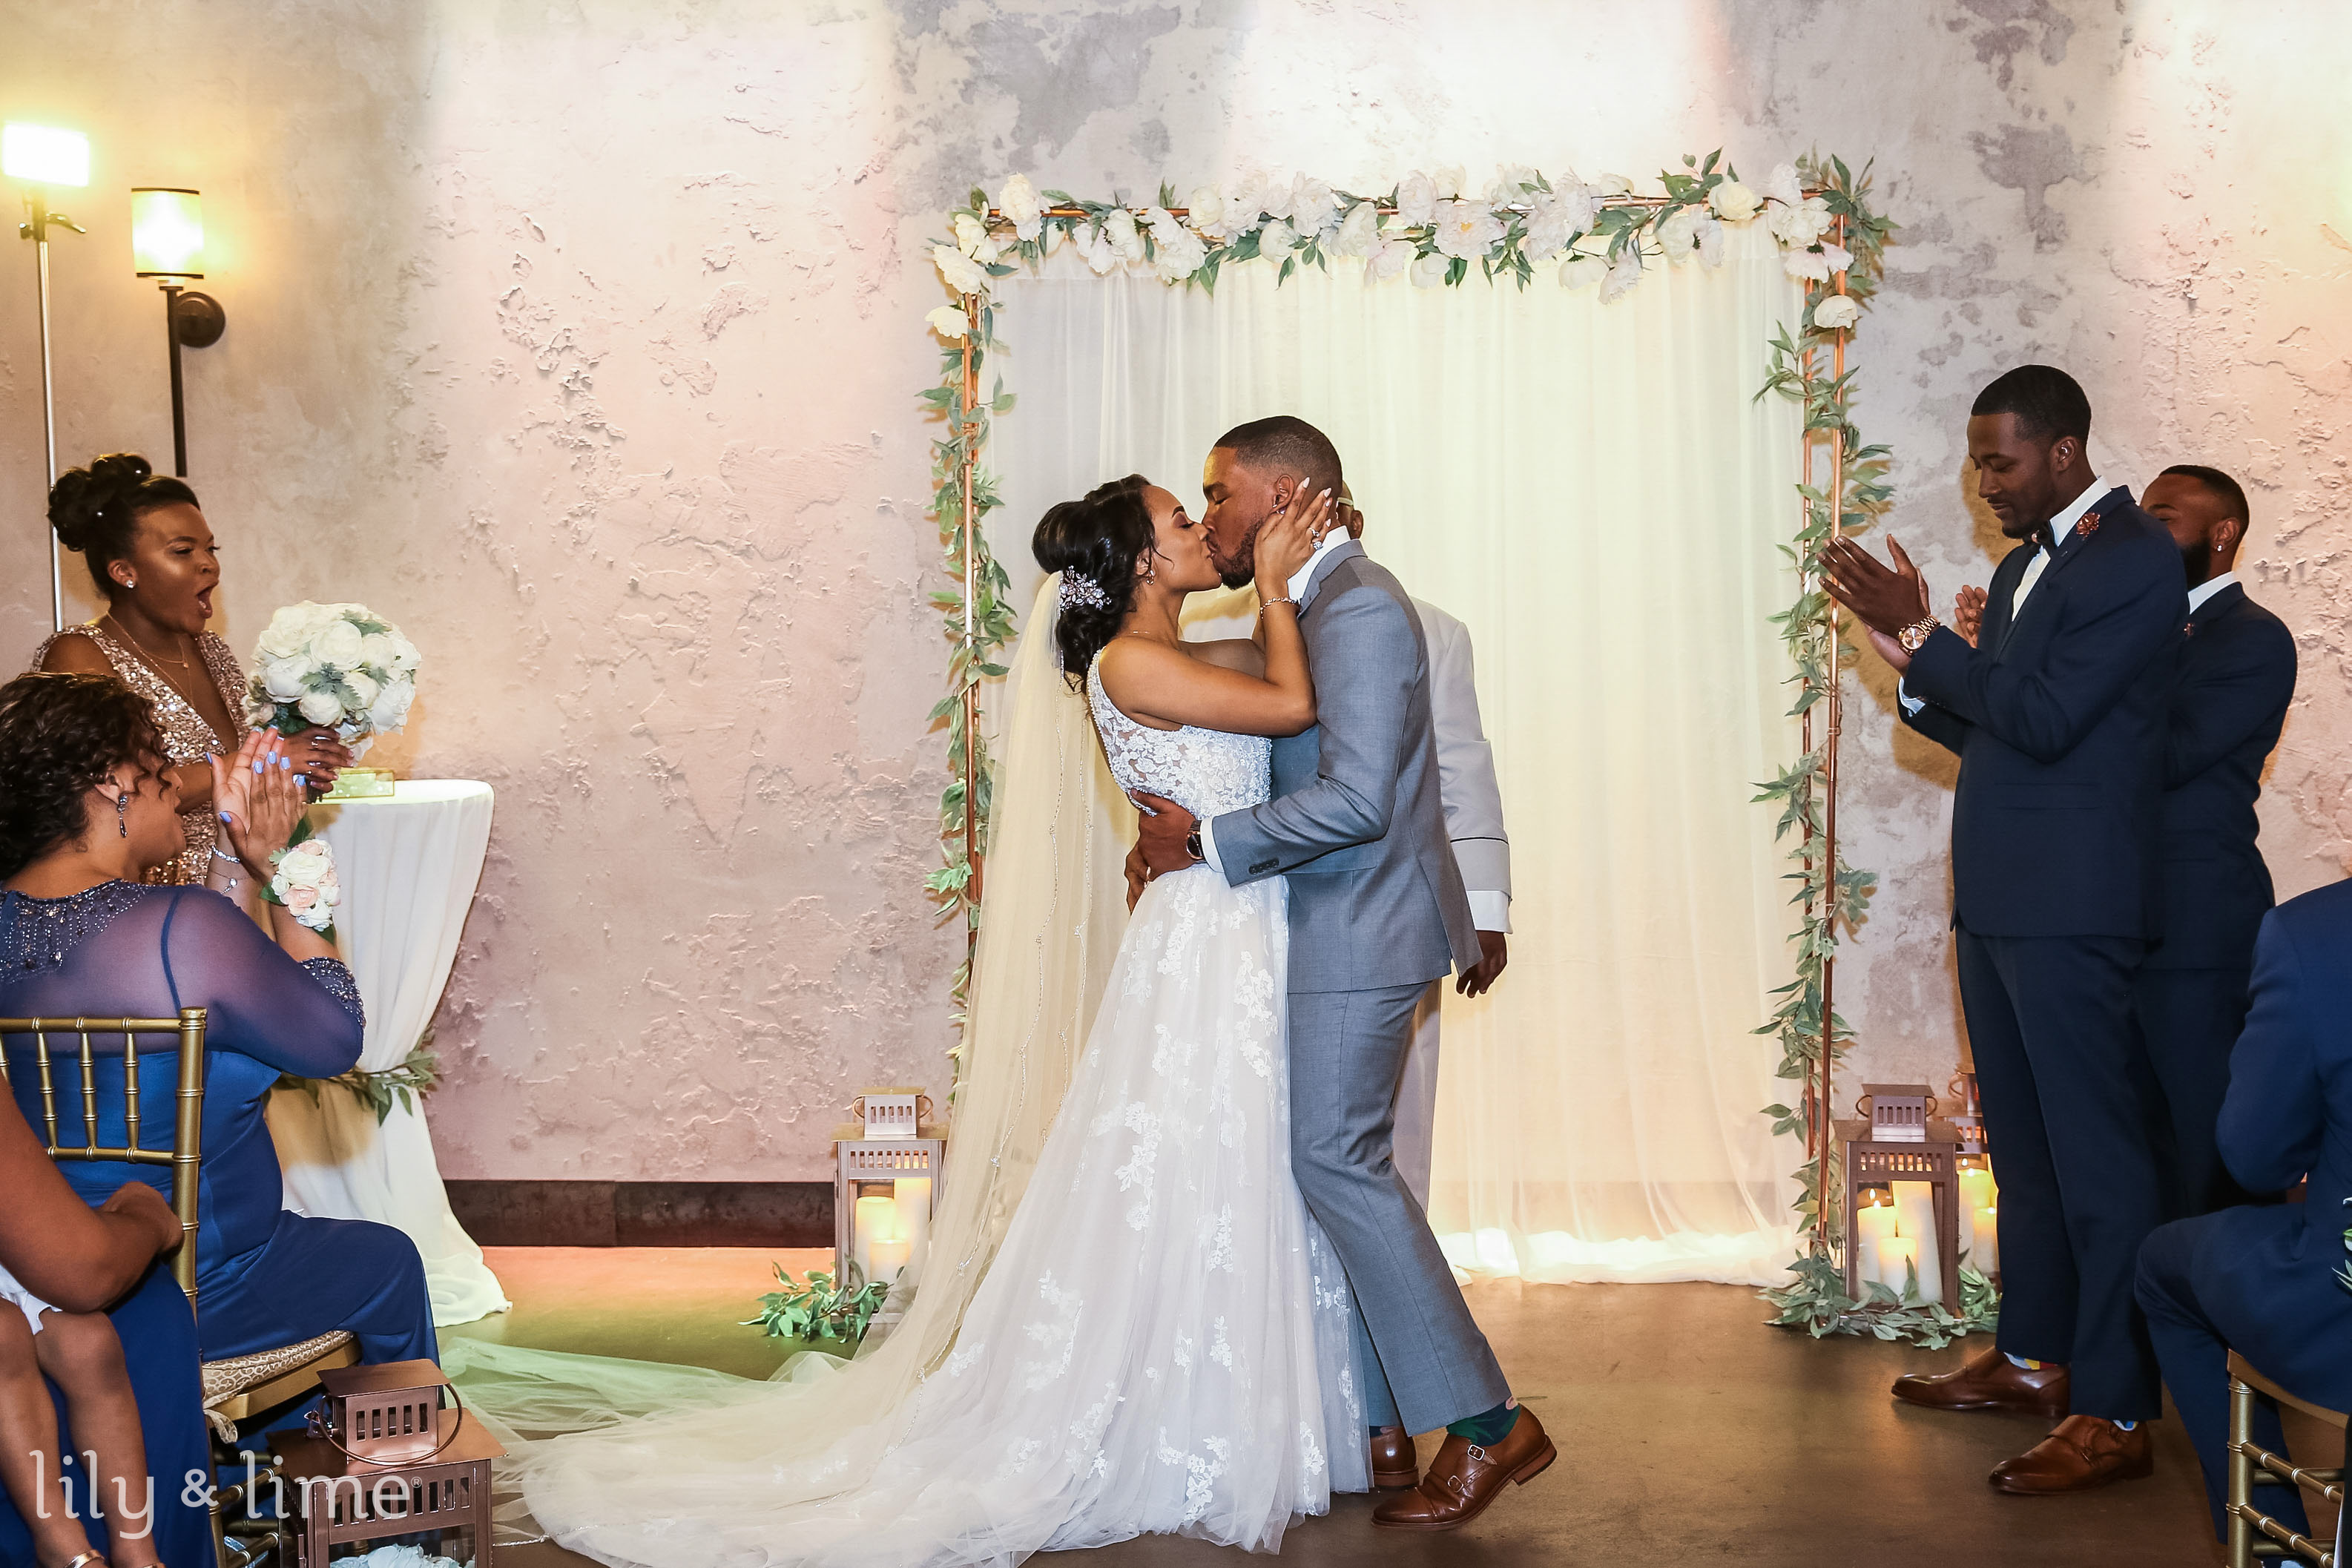 Black American Wedding Traditions To Incorporate Into Your Special Day